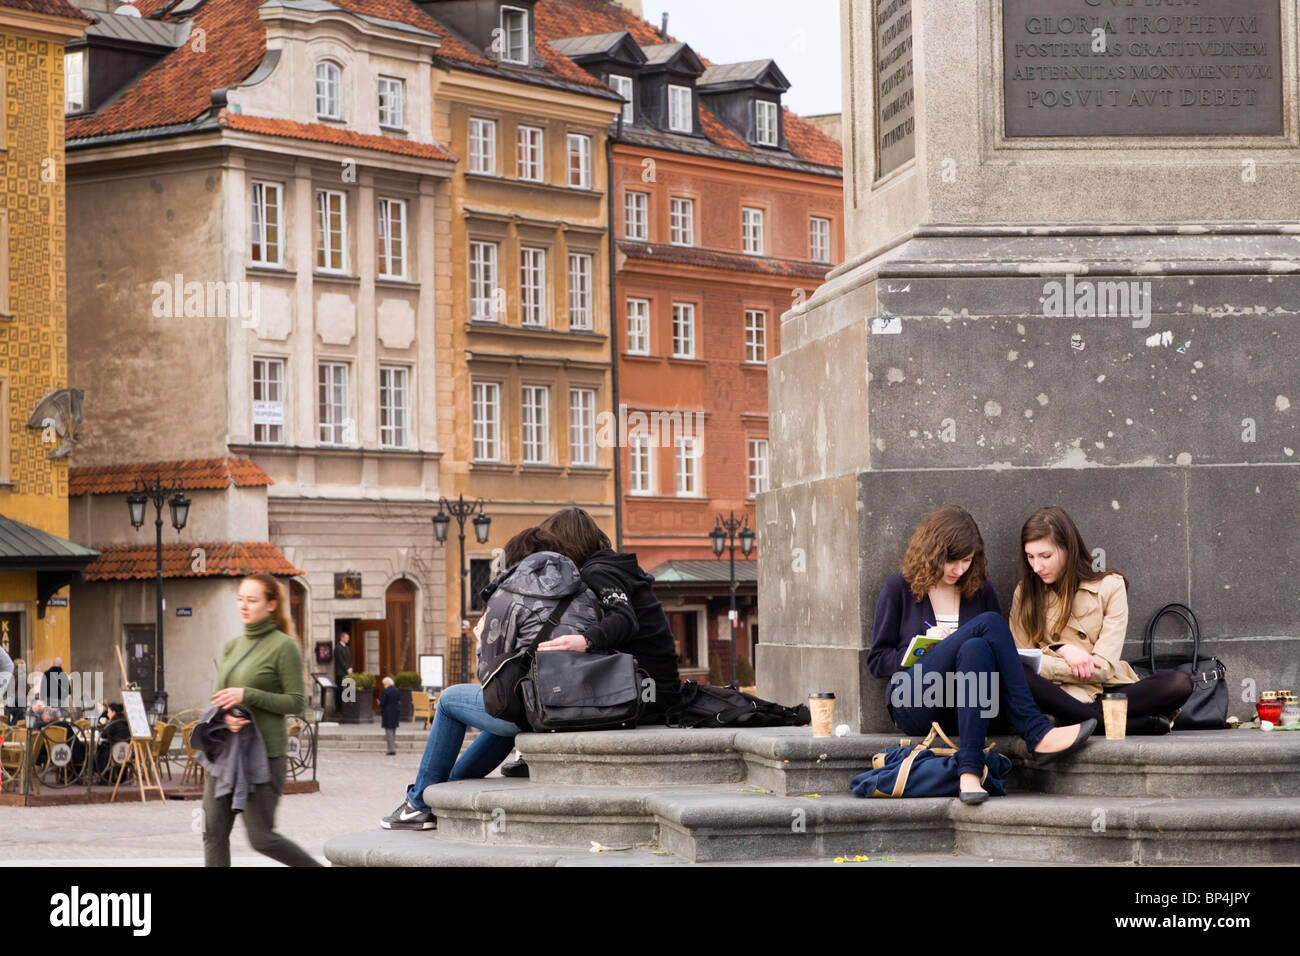 People relaxing by Zygmunt's Column, Warsaw Poland. It is located in the Castle Square, at the entrance to the Old Town. Stock Photo